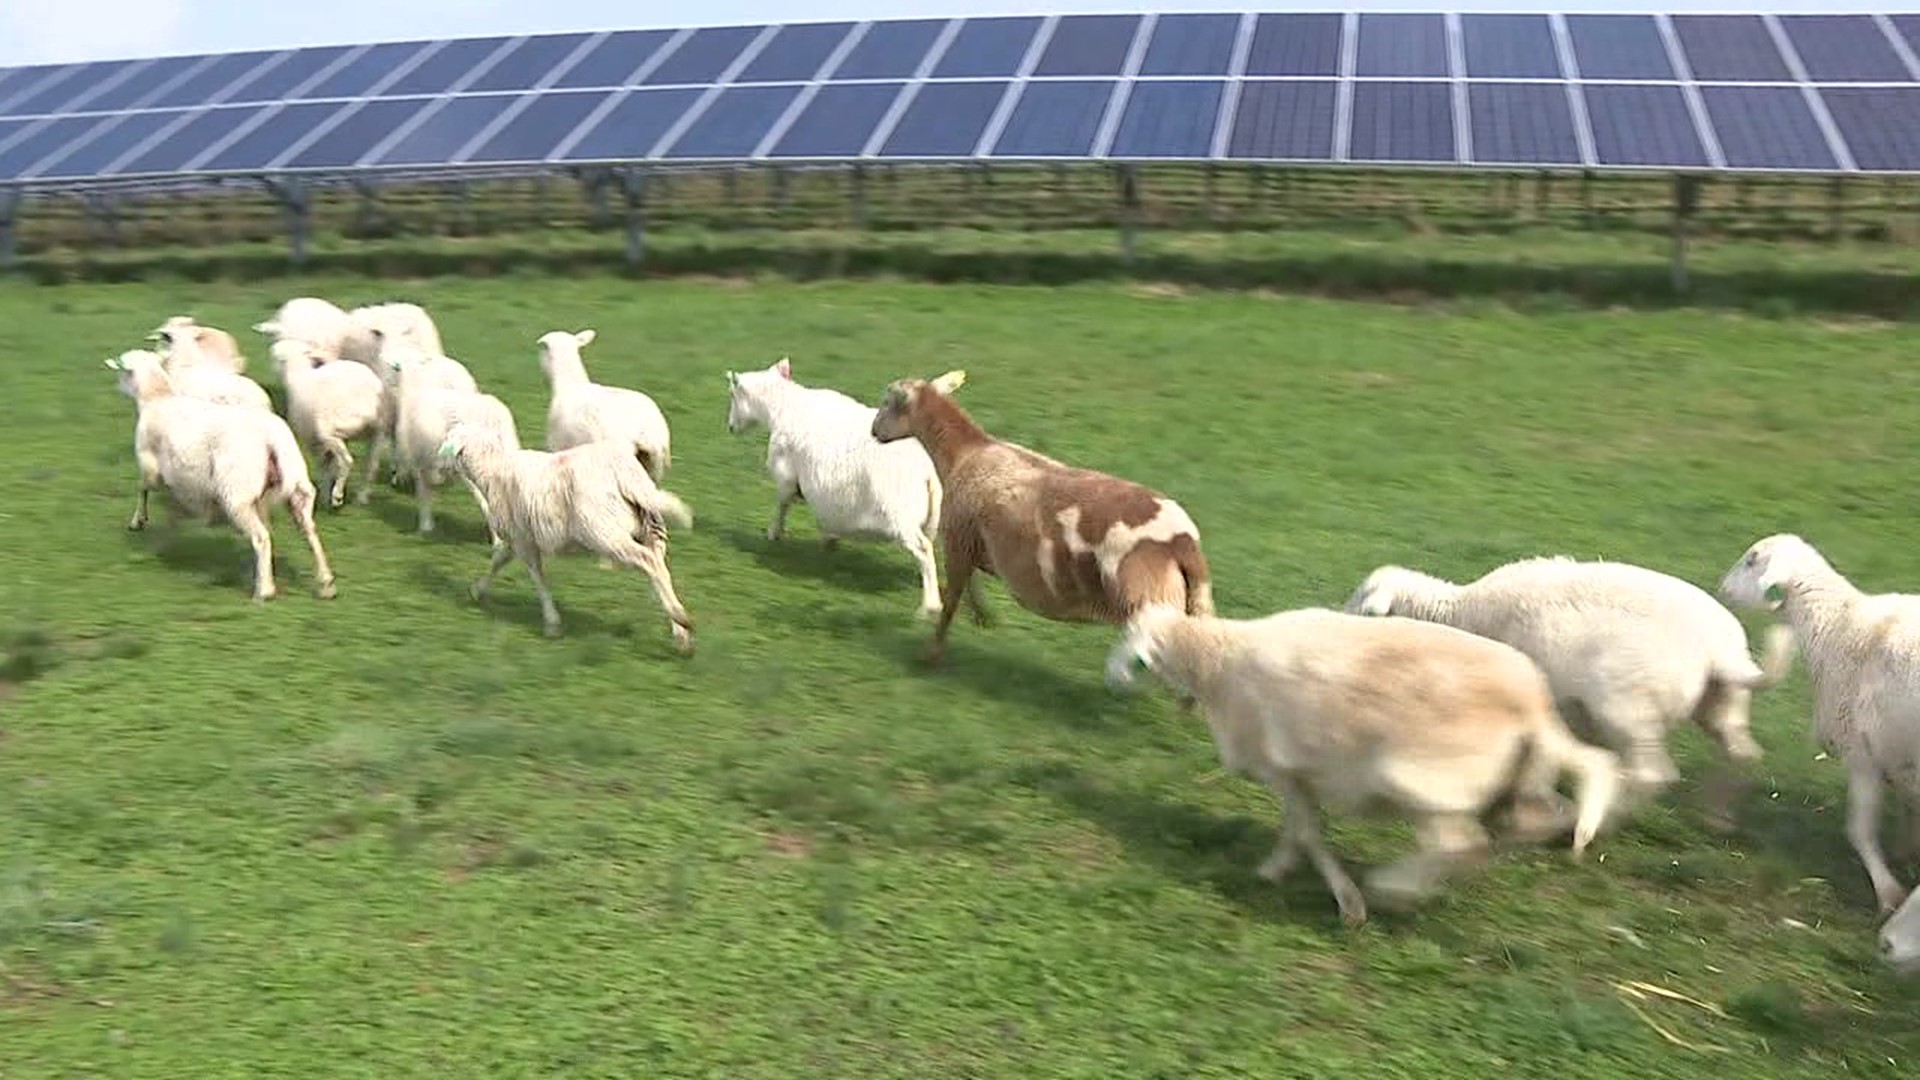 Some popular residents have returned to Susquehanna University, but they aren't college students. 40 sheep spend part of the year at the university's solar array.